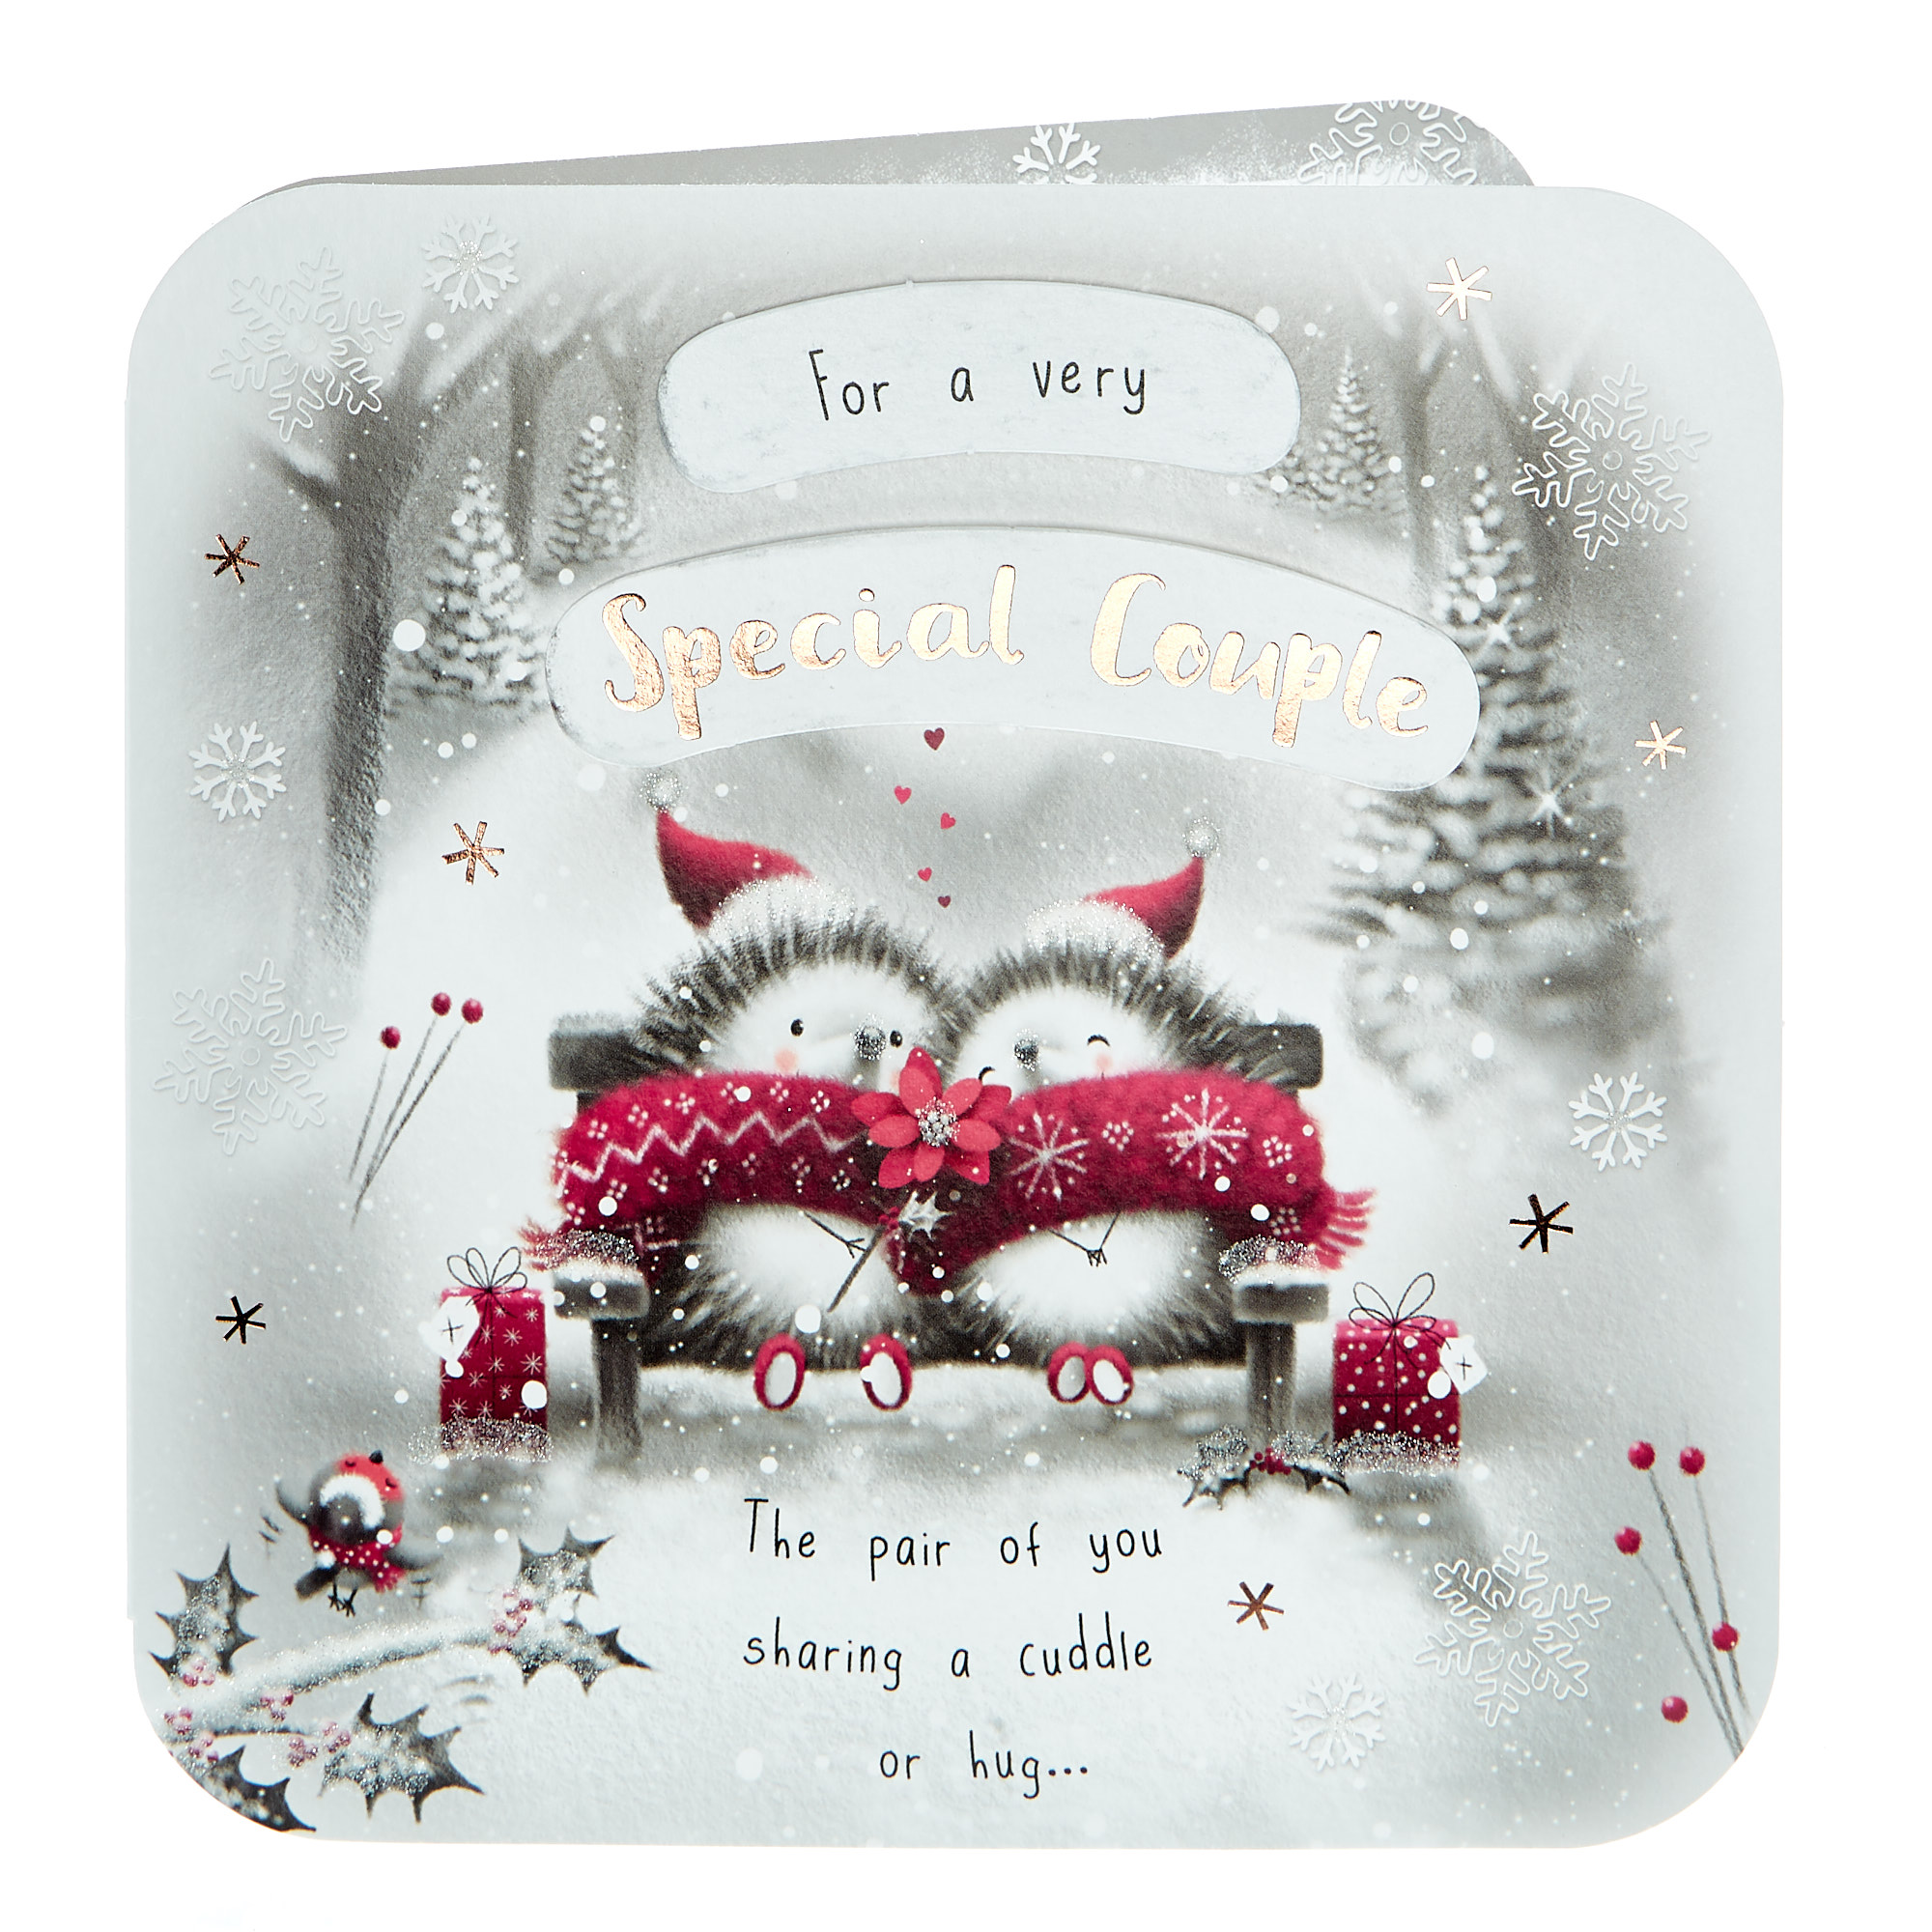 Exquisite Collection Christmas Card - Special Couple